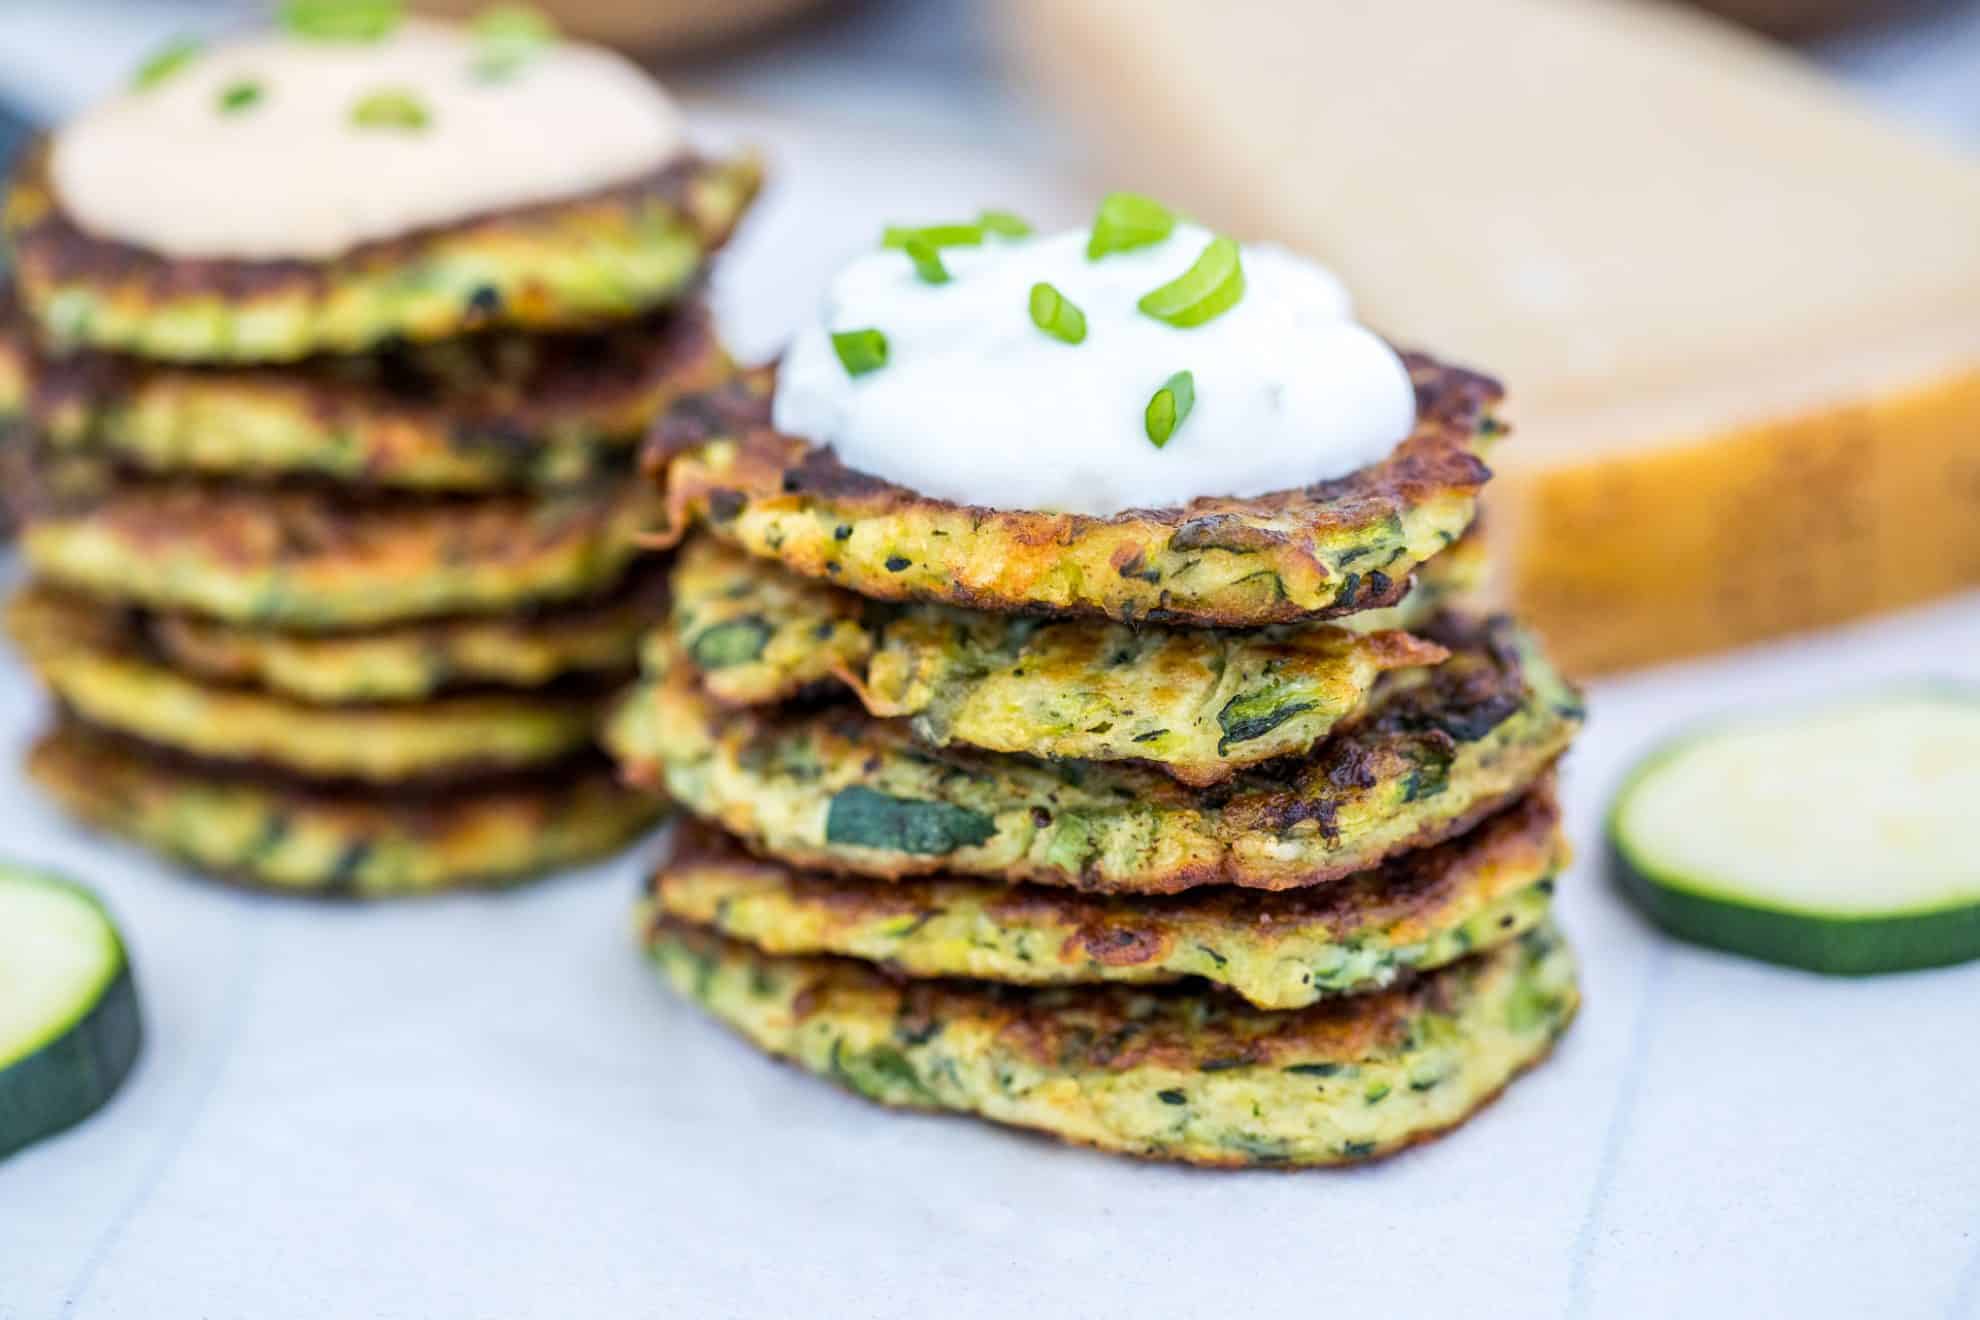 Zucchini fritters with sour cream and chives